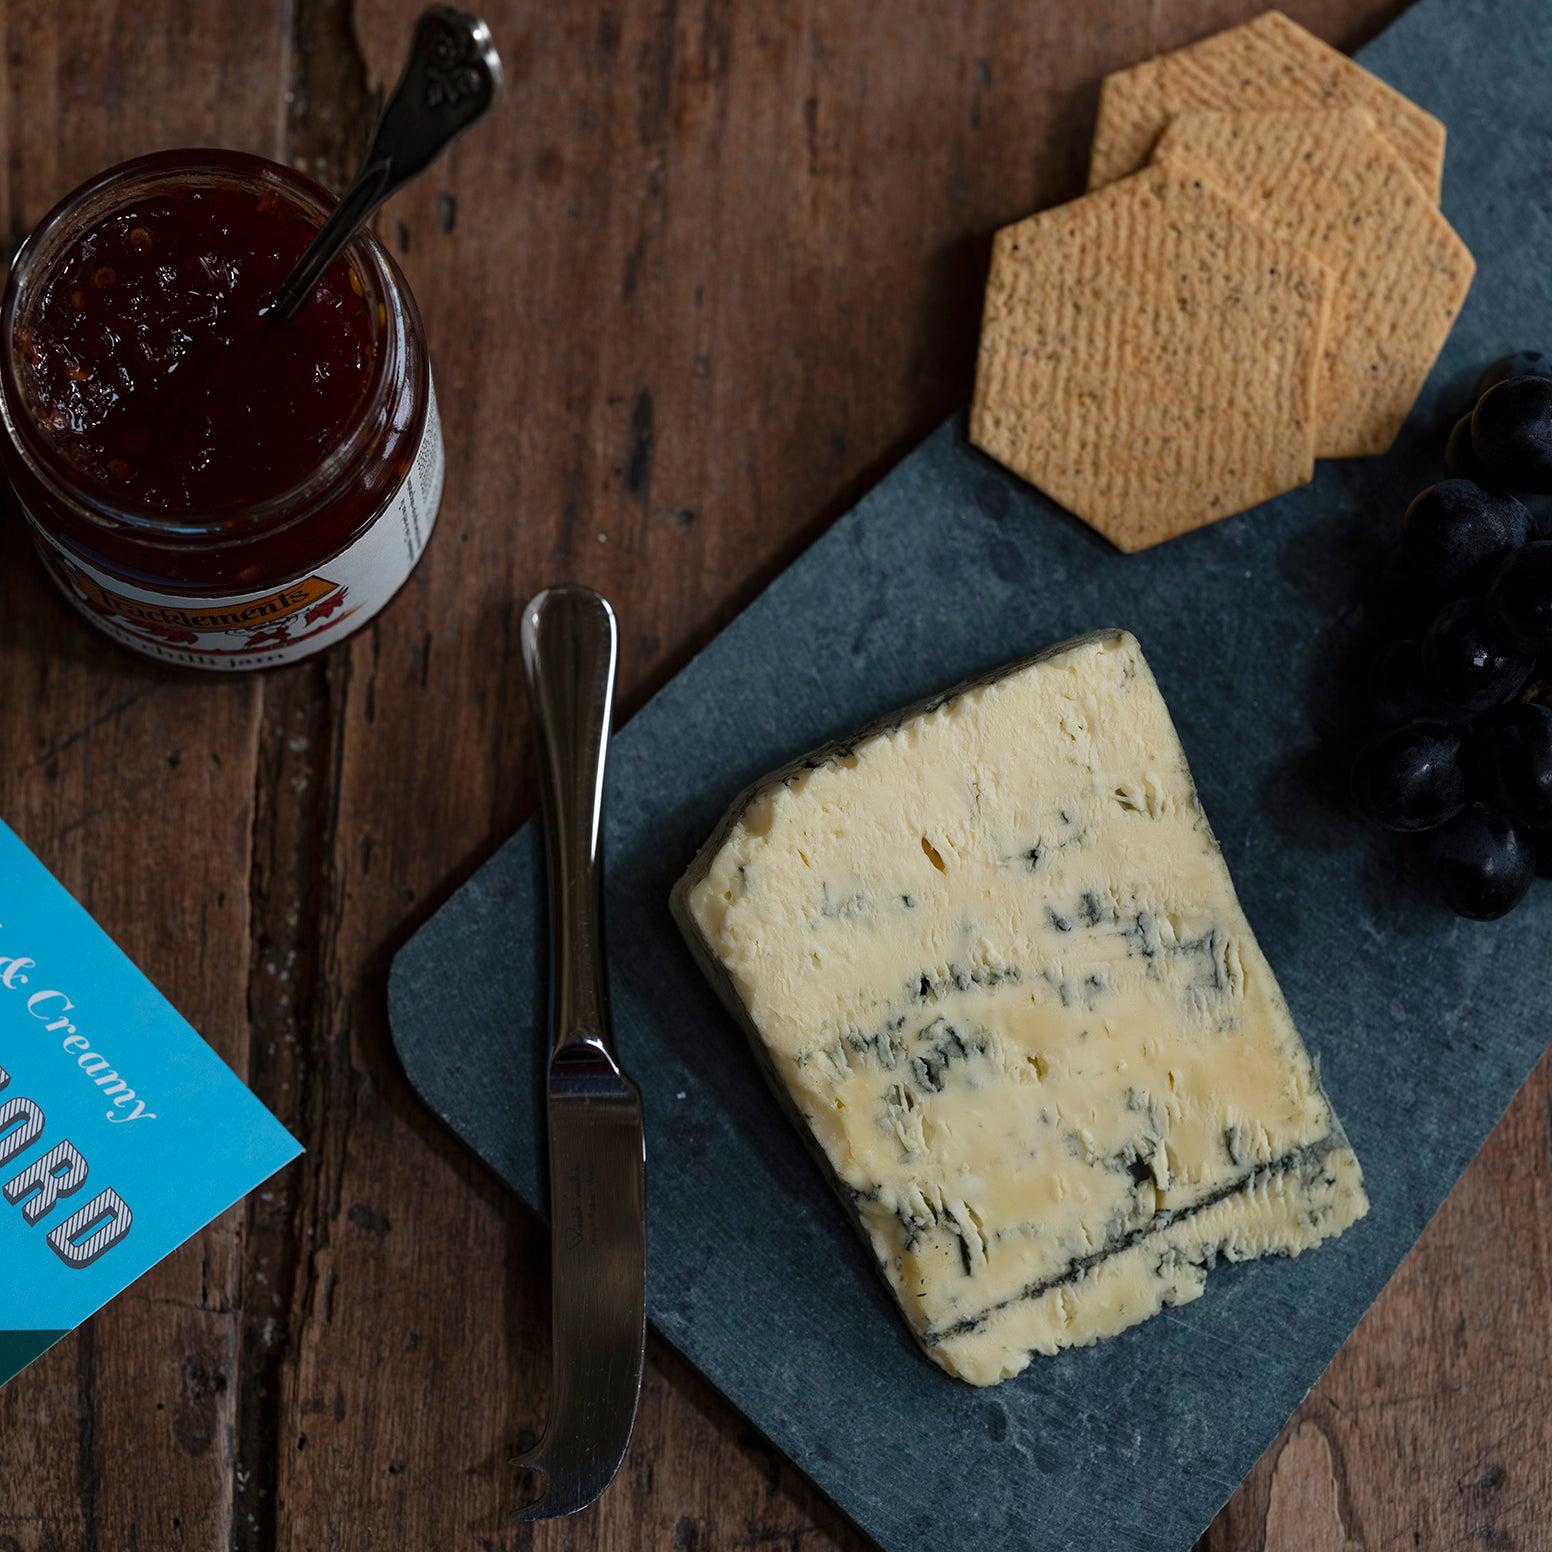 Stratford Blue cheese serving suggestion, served on a cheeseboard with crackers, grapes and relish. A creamy and rich blue cheese from Butler's Cheese Store.